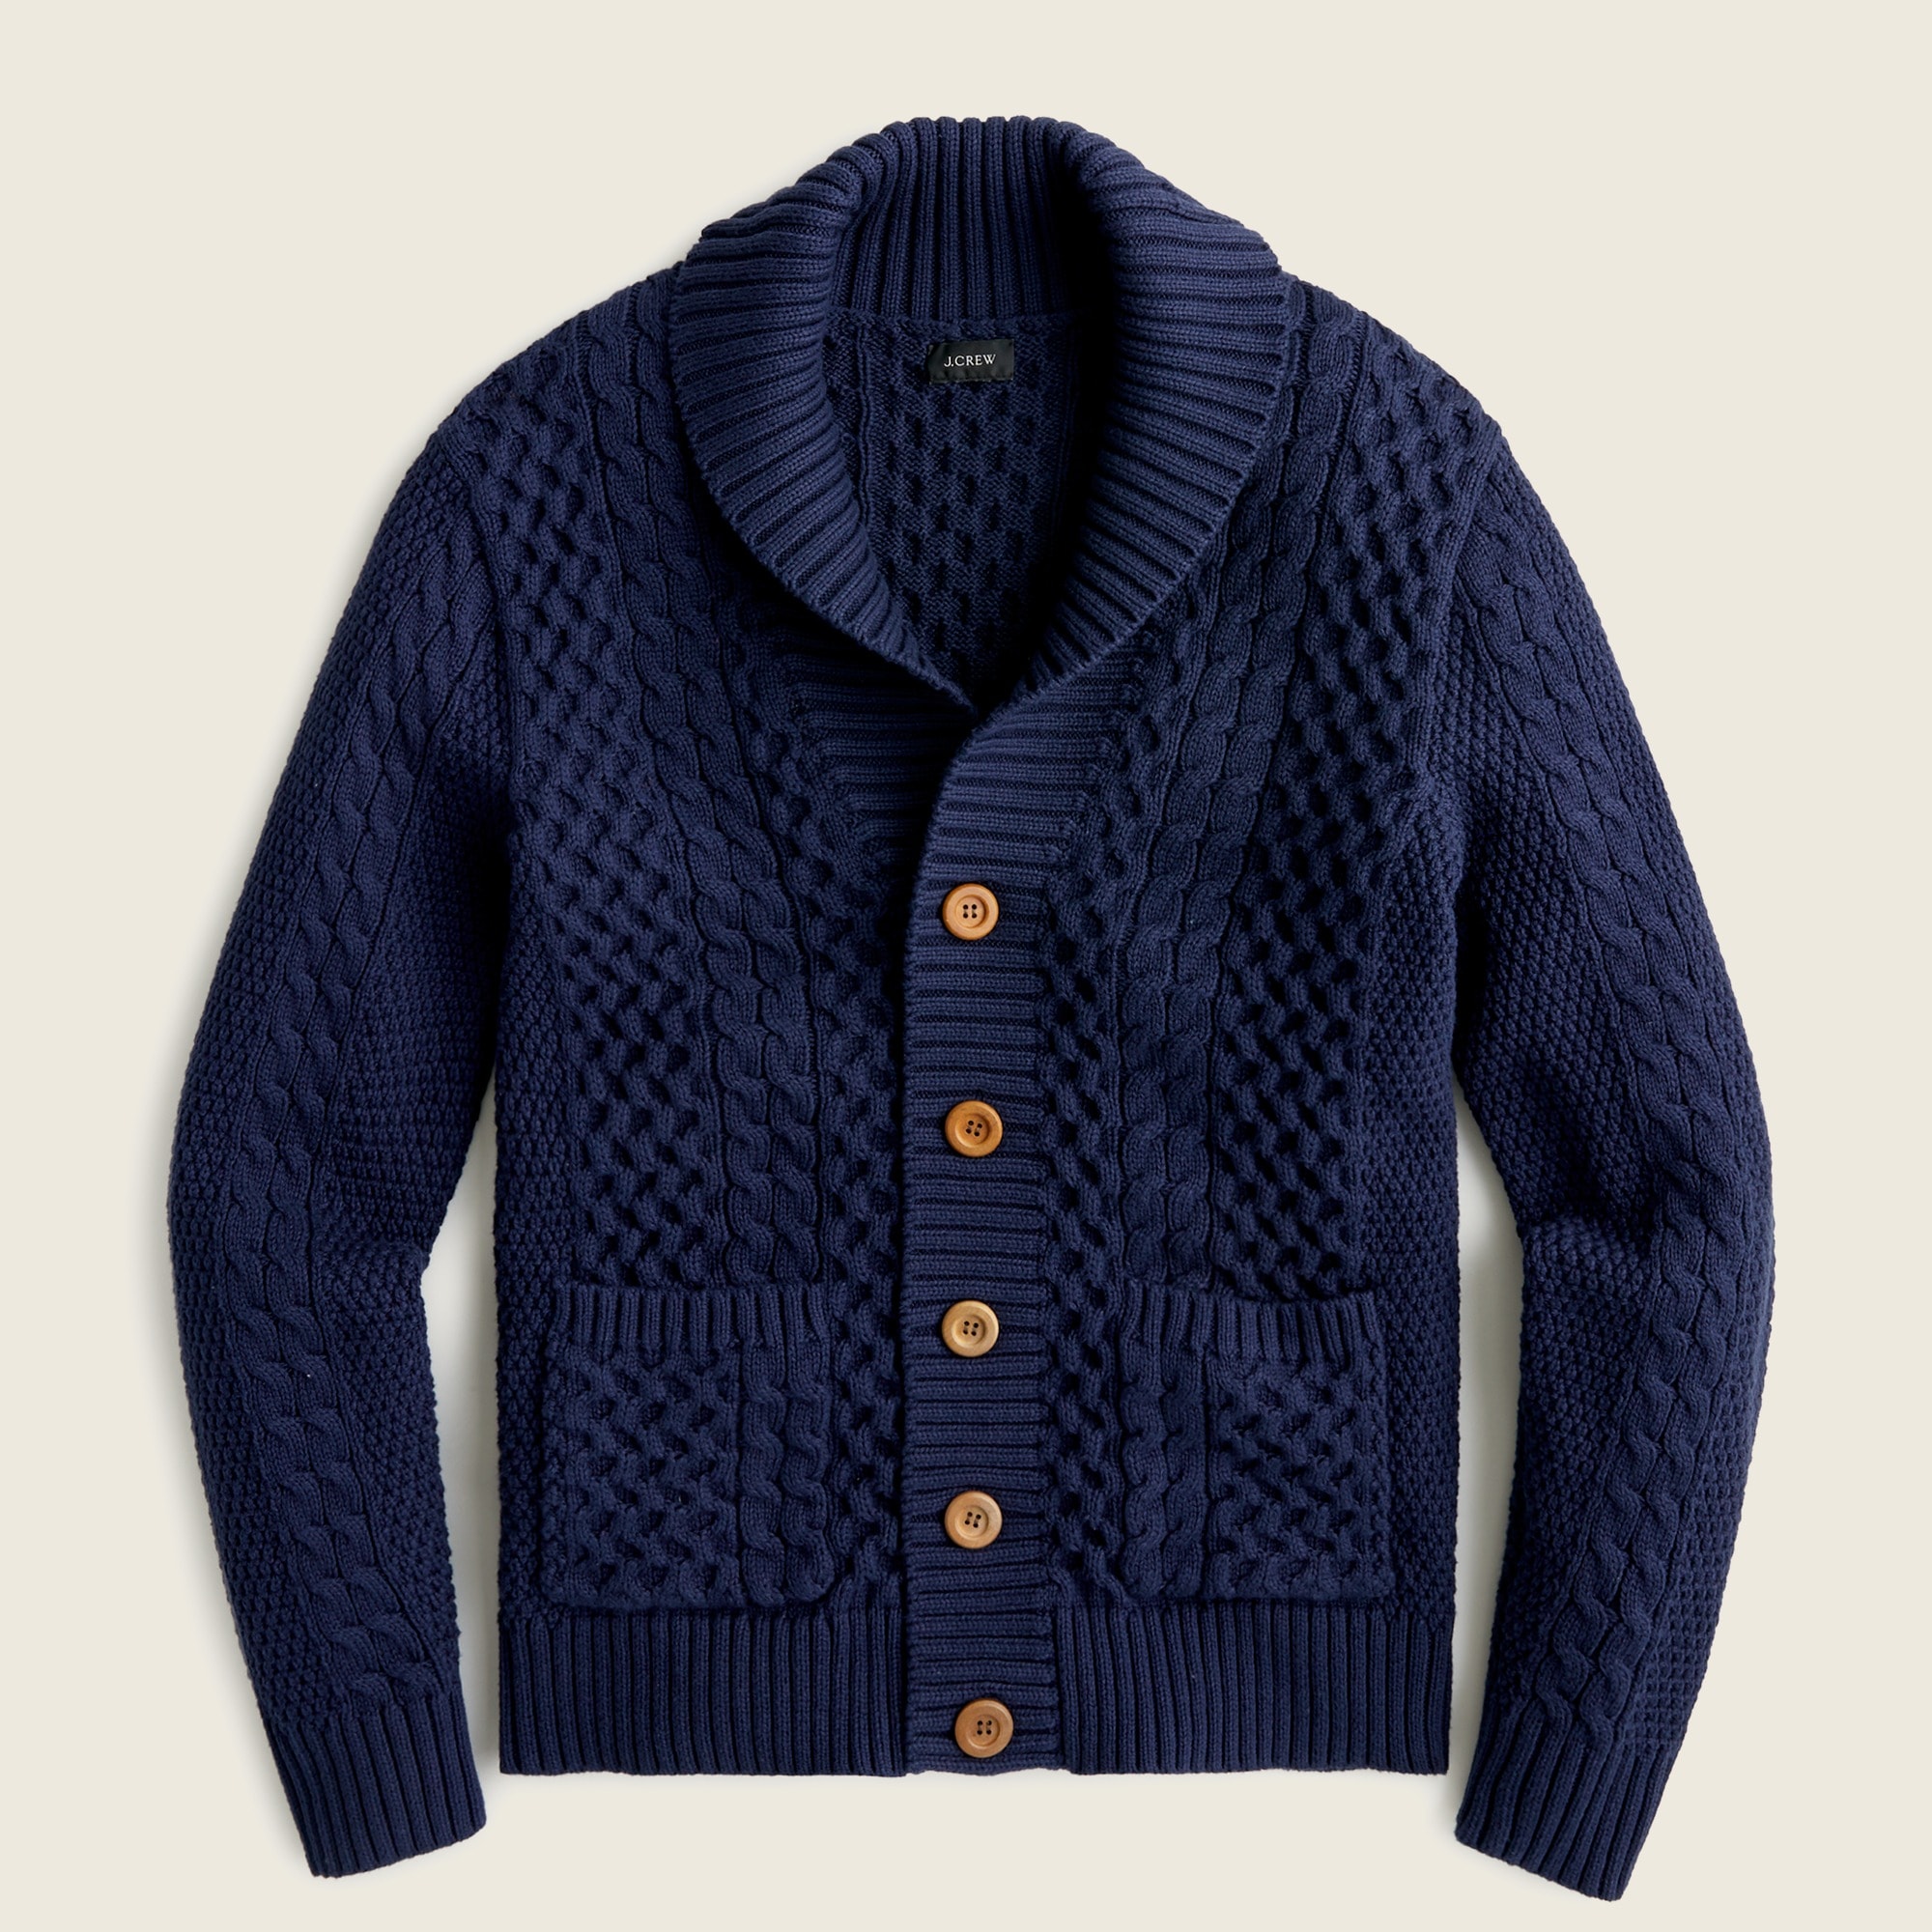 J.Crew: Cotton Cable-knit Shawl-collar Cardigan For Men